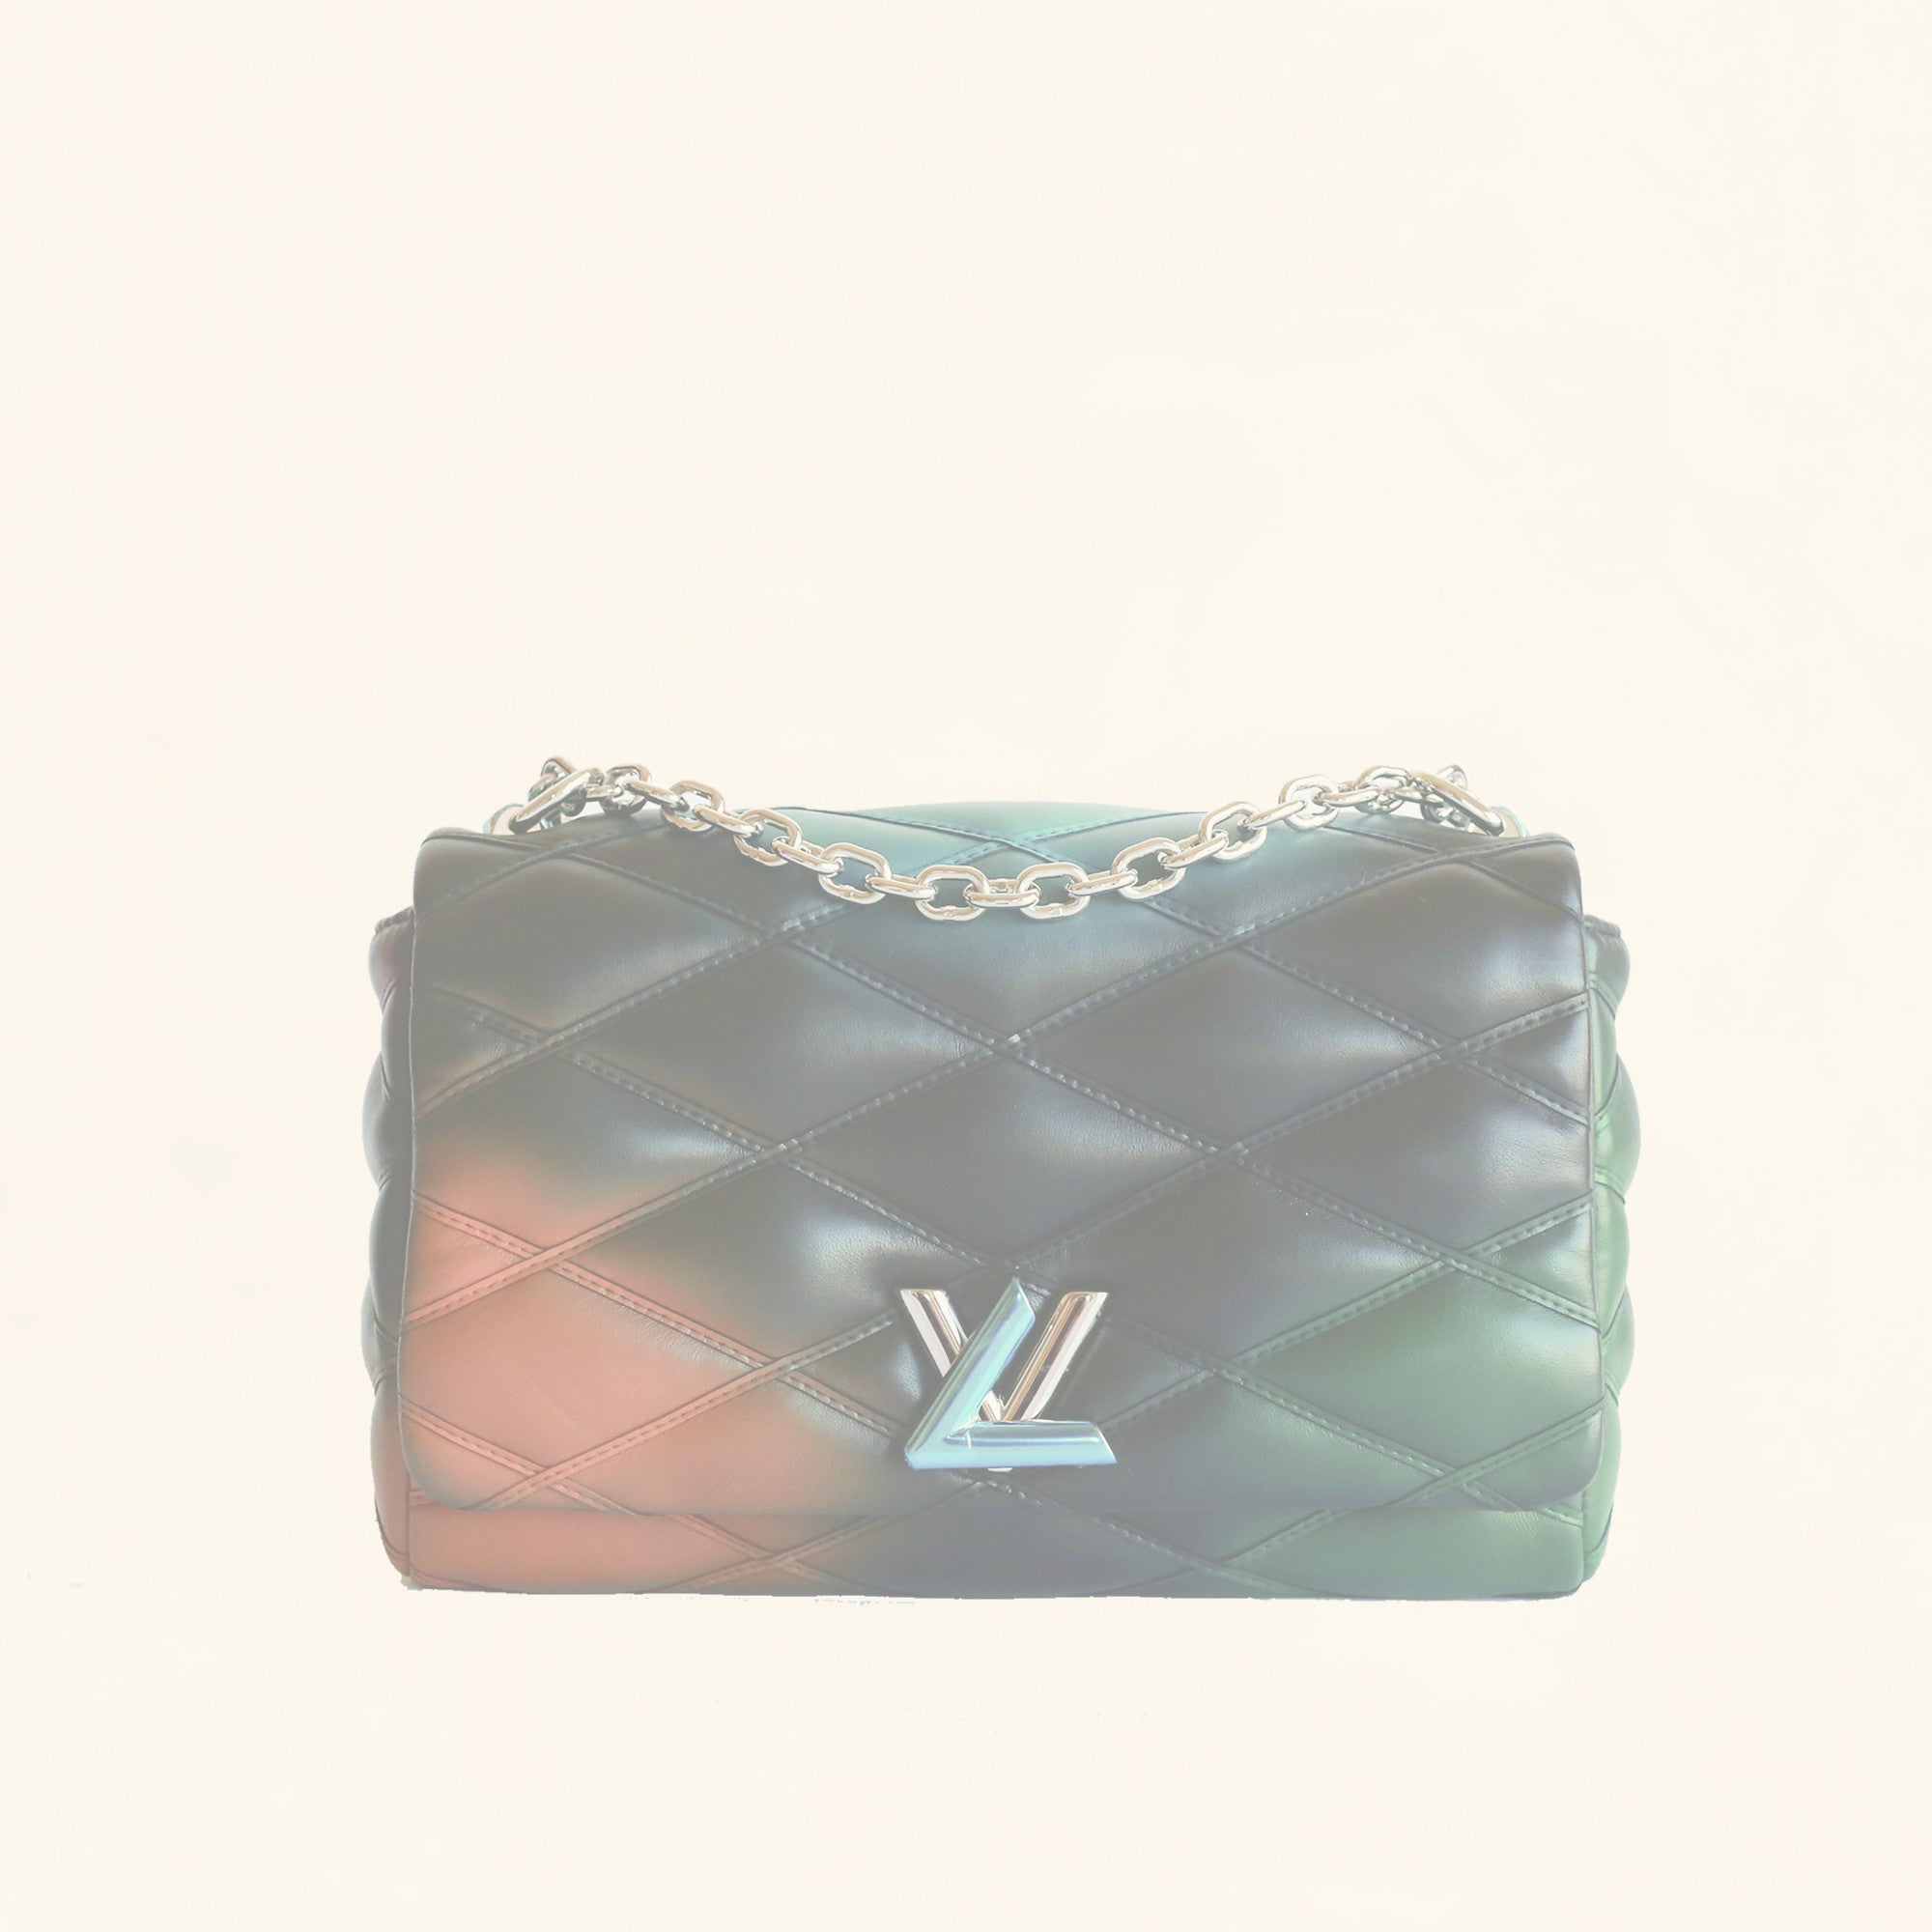 Your first look at the new Louis Vuitton GO-14 bag